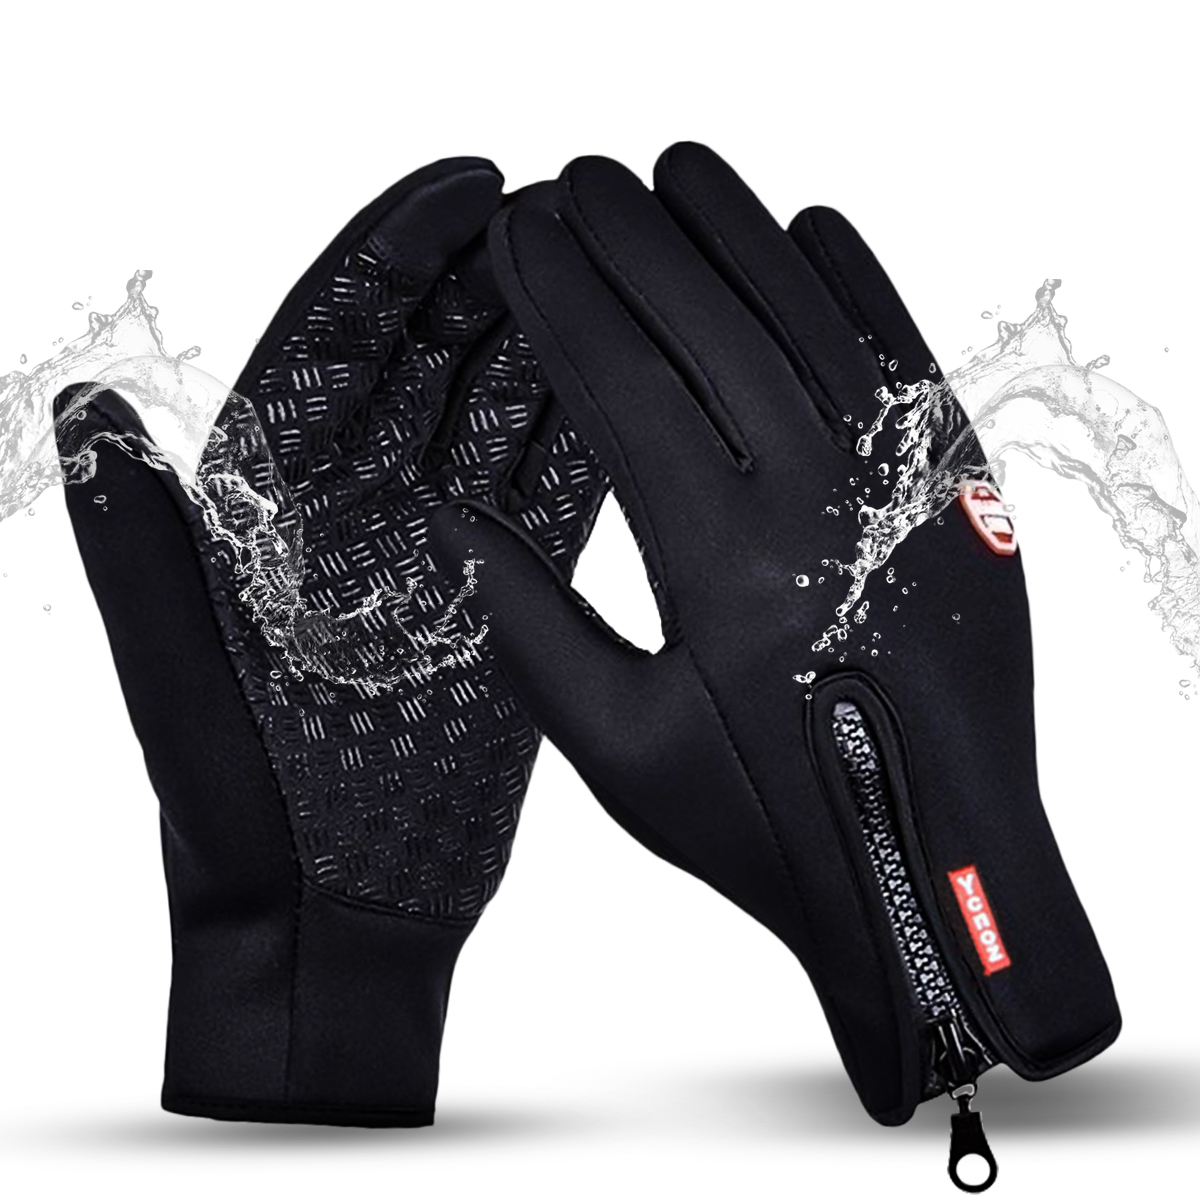 1Pair-Touch-Screen-Tactical-Glove-Winter-Sport-Skiing-Gloves-Zipper-Thermal-Warm-Gloves-1627818-4